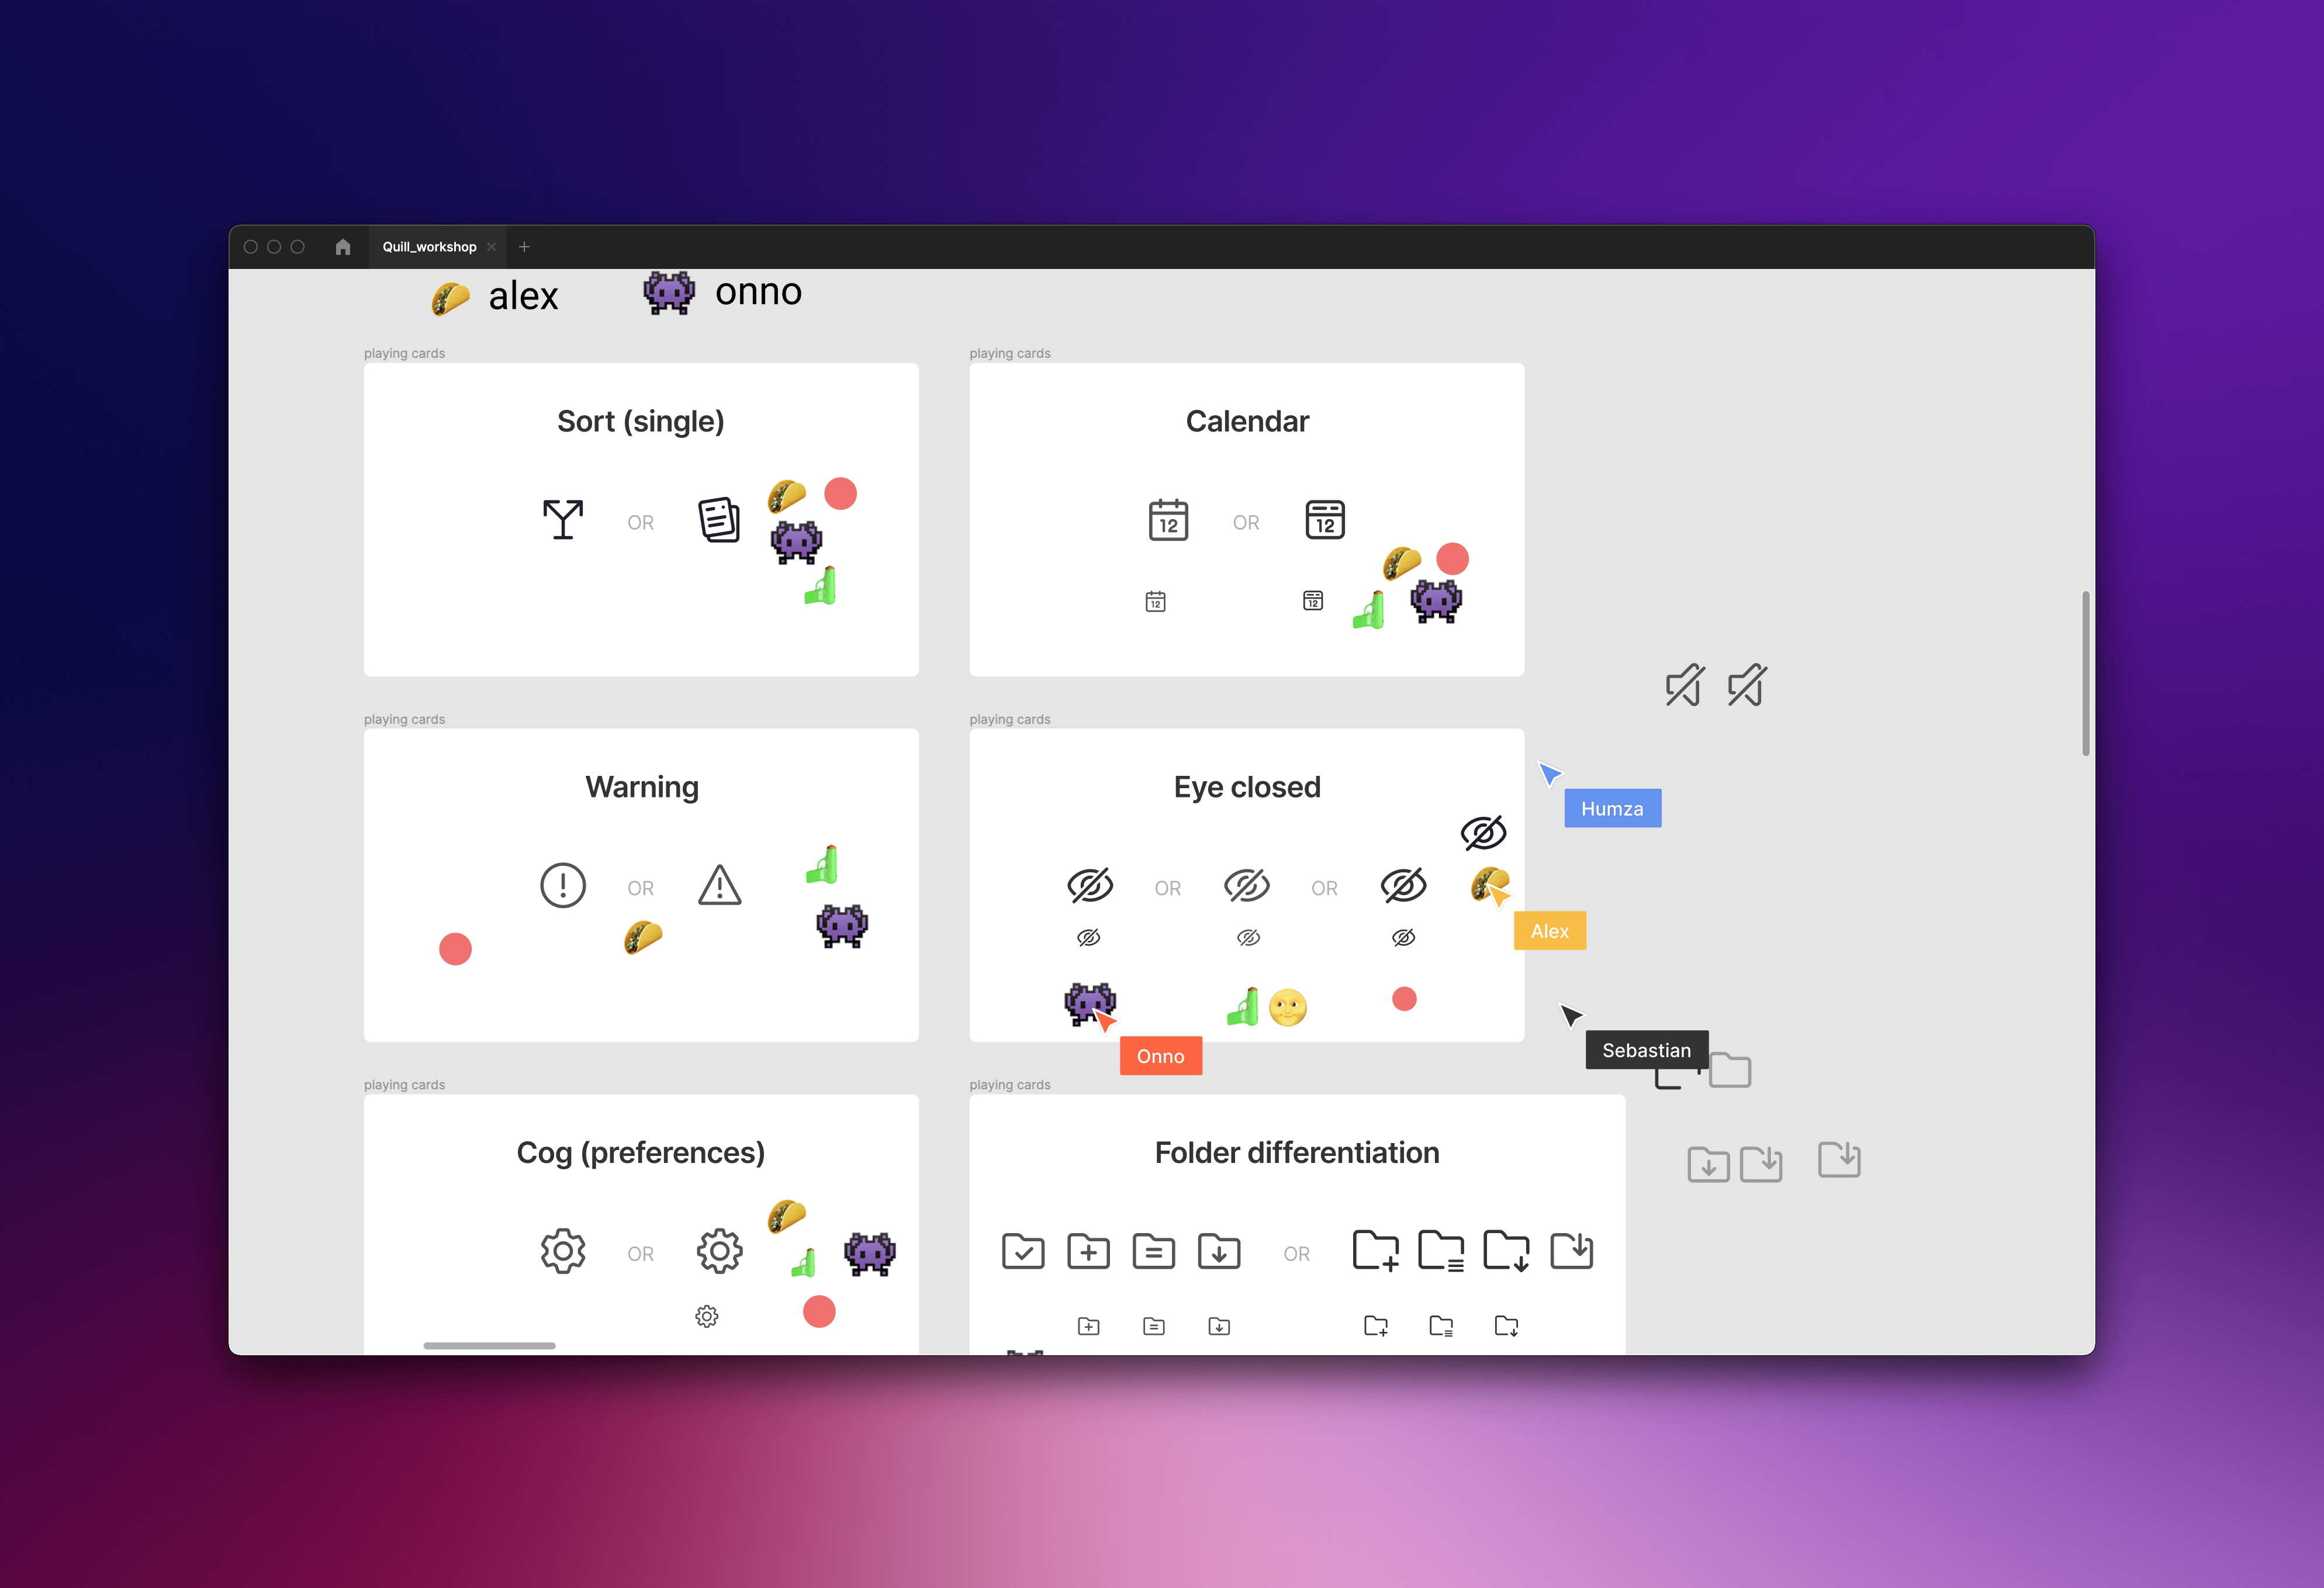 A screenshot of Figma, showing the work in progress of the iconset